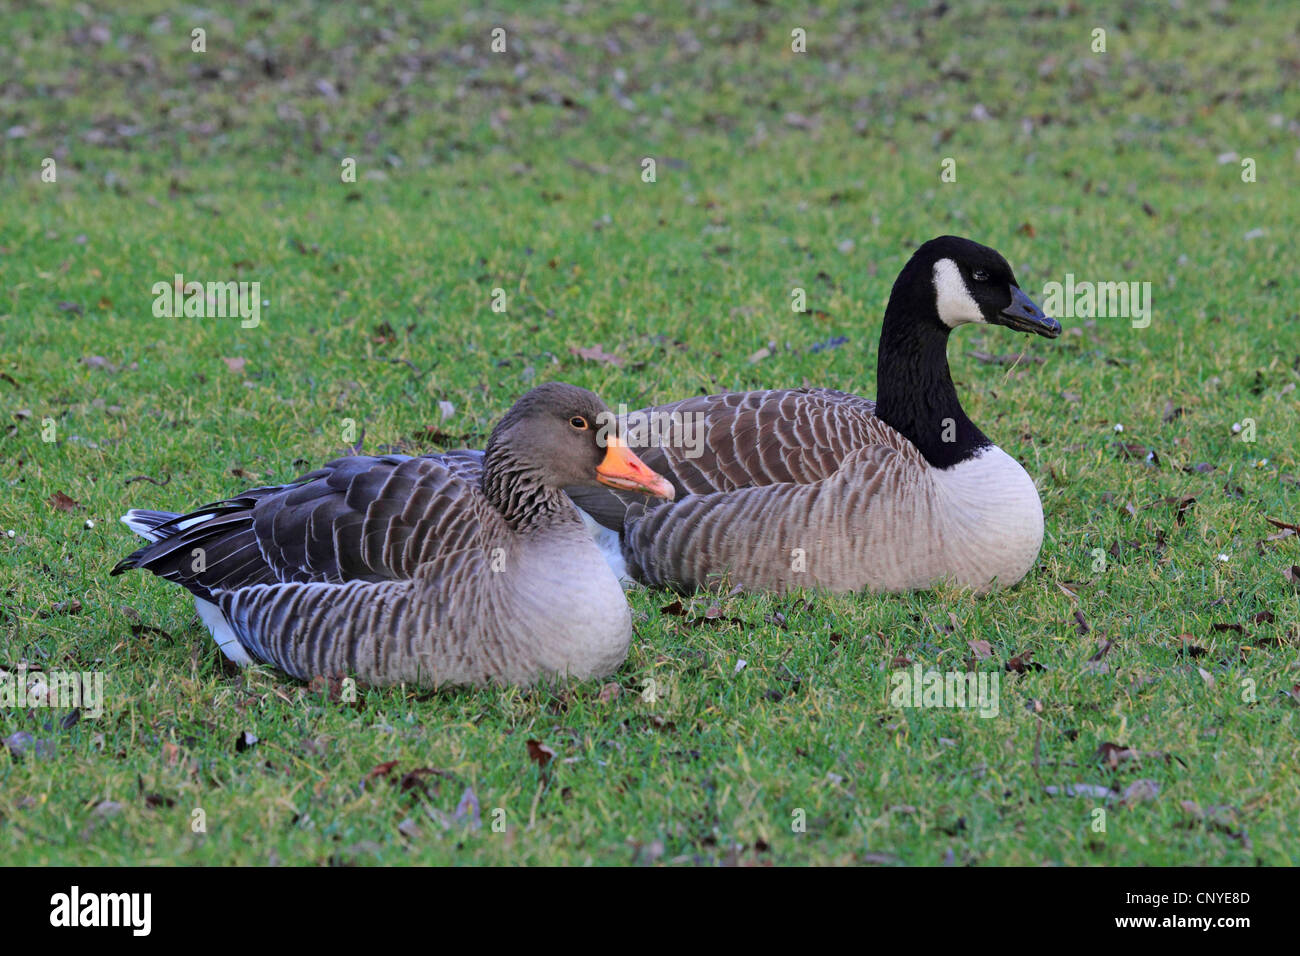 greylag goose (Anser anser), sitting on a lawn beside a Canada goose, Germany Stock Photo